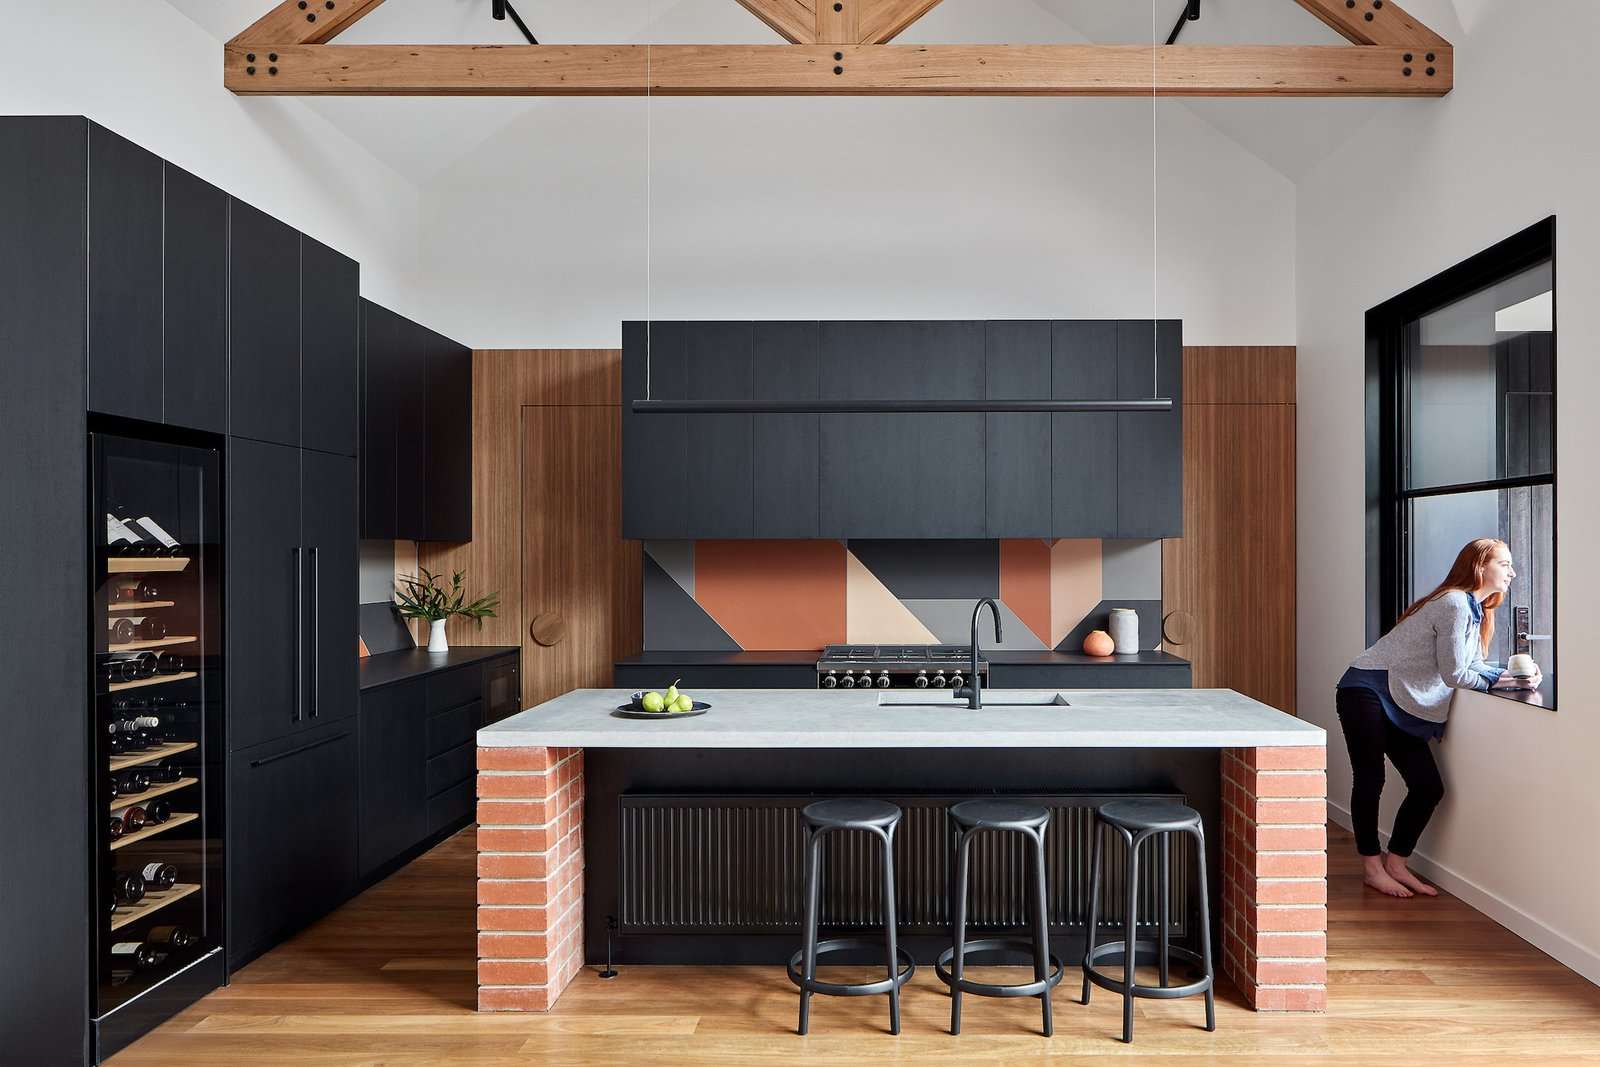 A red brick and concrete island acts as a centerpiece in the kitchen. The benches to the rear and side of island are made from Dekton Sirius reconstituted stone and are surrounded by black laminate cabinetry. The tiles used for the backsplash are Tierras by Patricia Urquiola for Mutina.